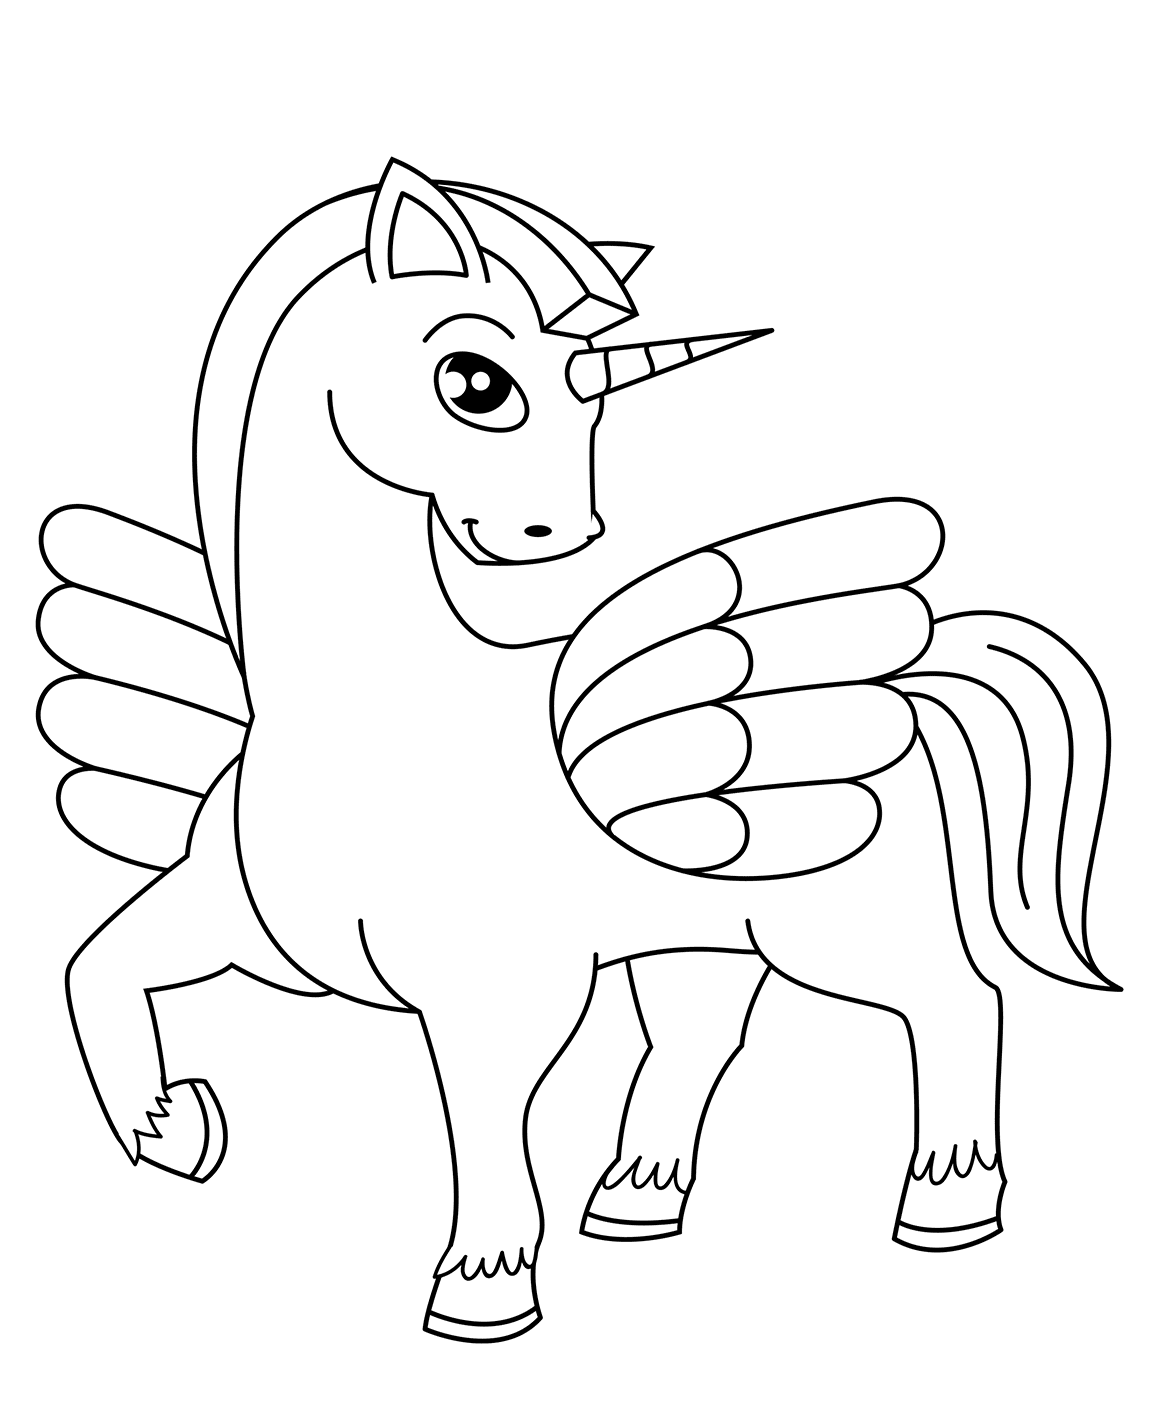 Cute Winged Unicorn Coloring Page